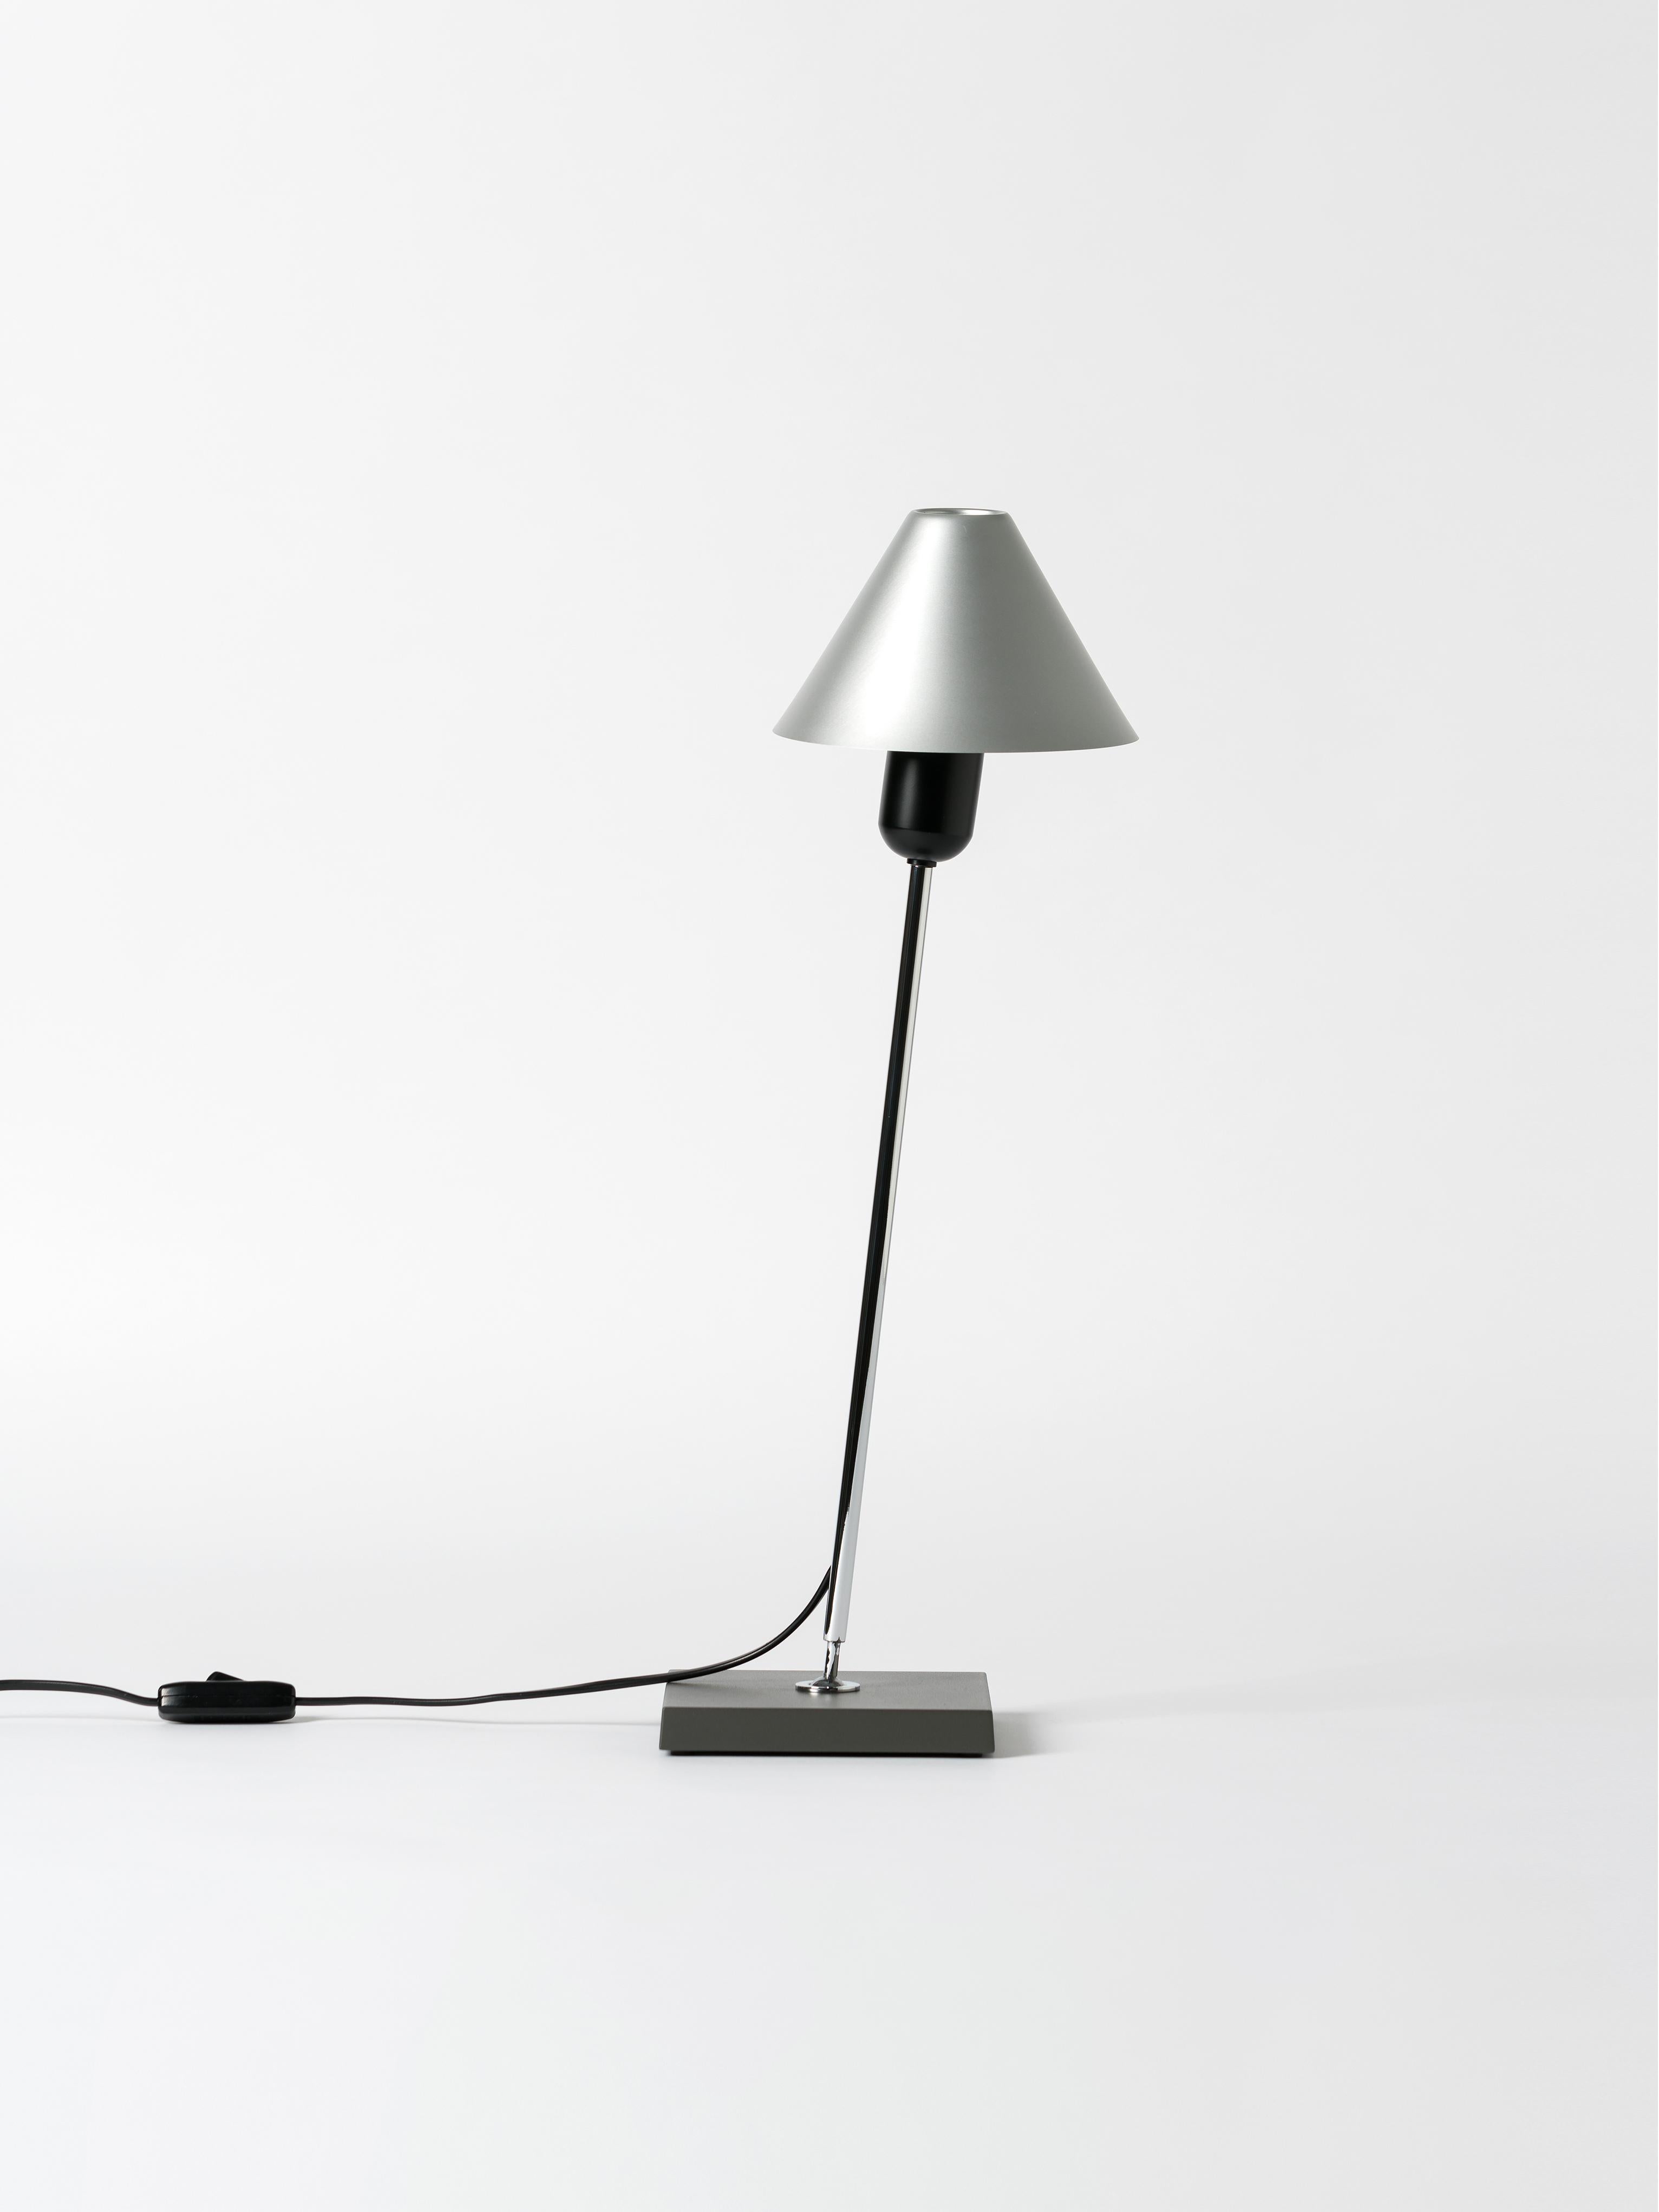 Aluminum gira table lamp by Miguel Milá
Dimensions: D 16 x H 54 cm
Materials: Aluminum.
Available in 3 colors: Aluminum, black and brass.

The gira lamp has all the simplicity and the profile of a classic. This lamp encapsulates all the